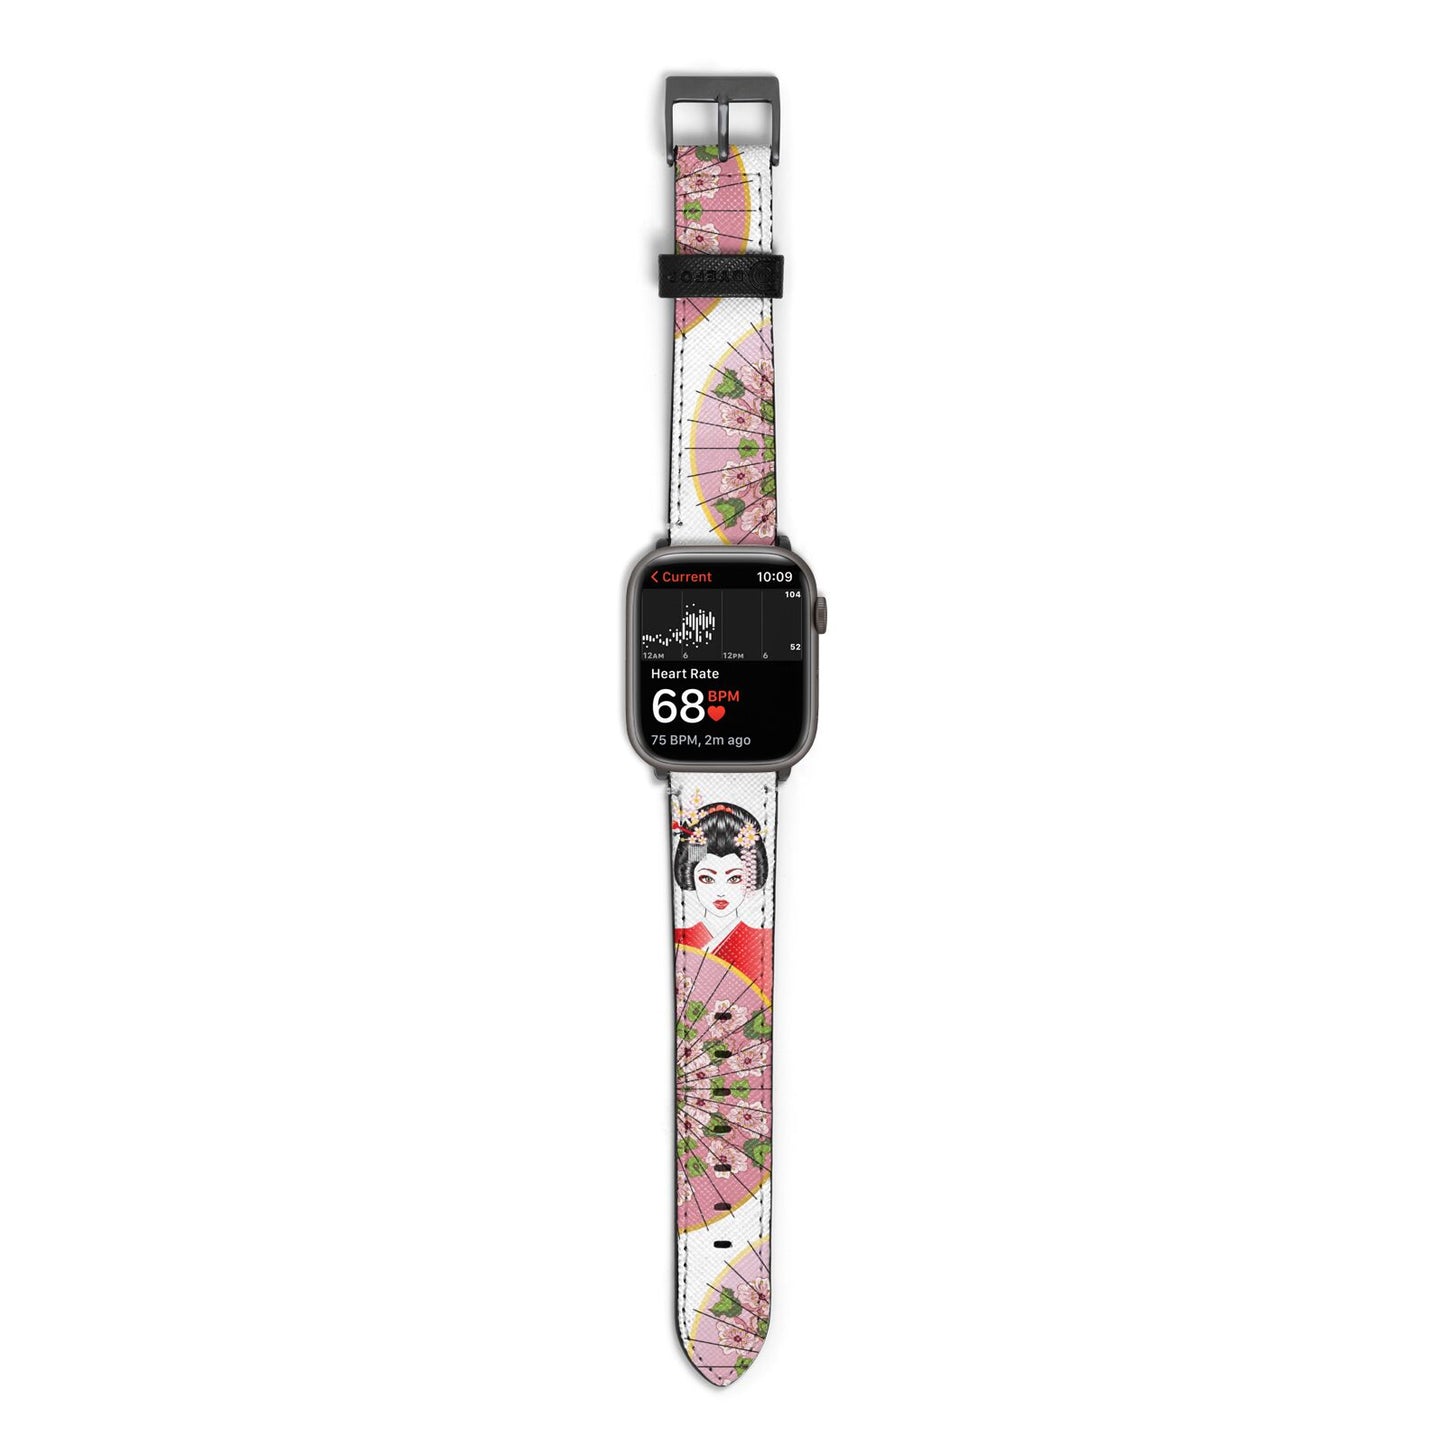 Geisha Girl Apple Watch Strap Size 38mm with Space Grey Hardware